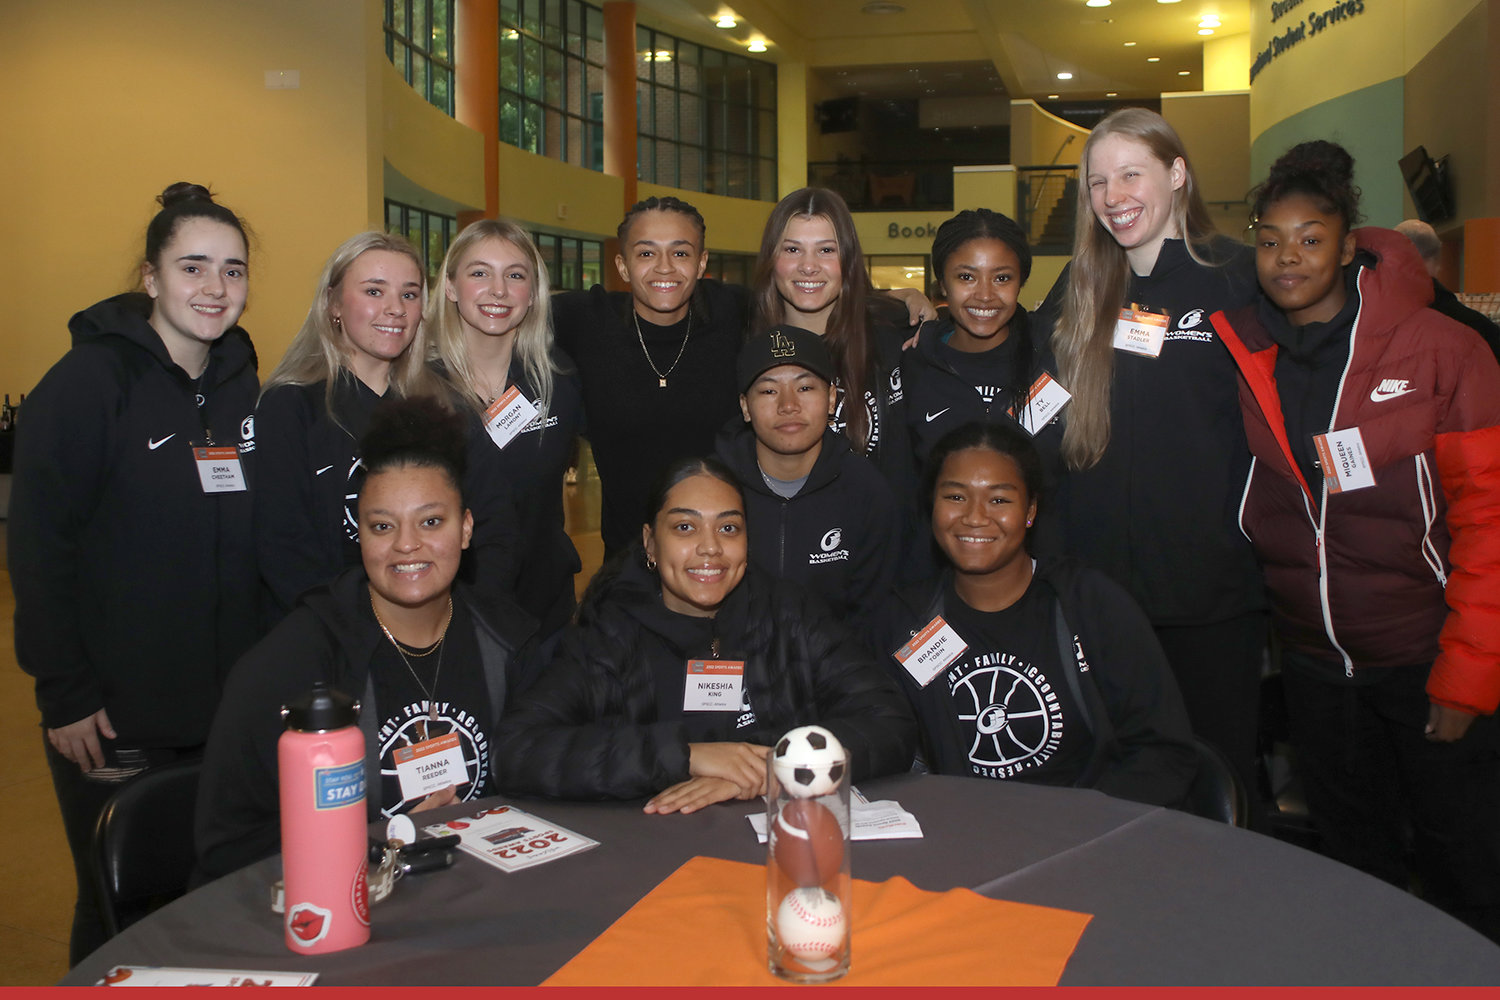 Women Sports Star nominee Sharay Trotter (center) with her basketball team from South Puget Sound Community College.